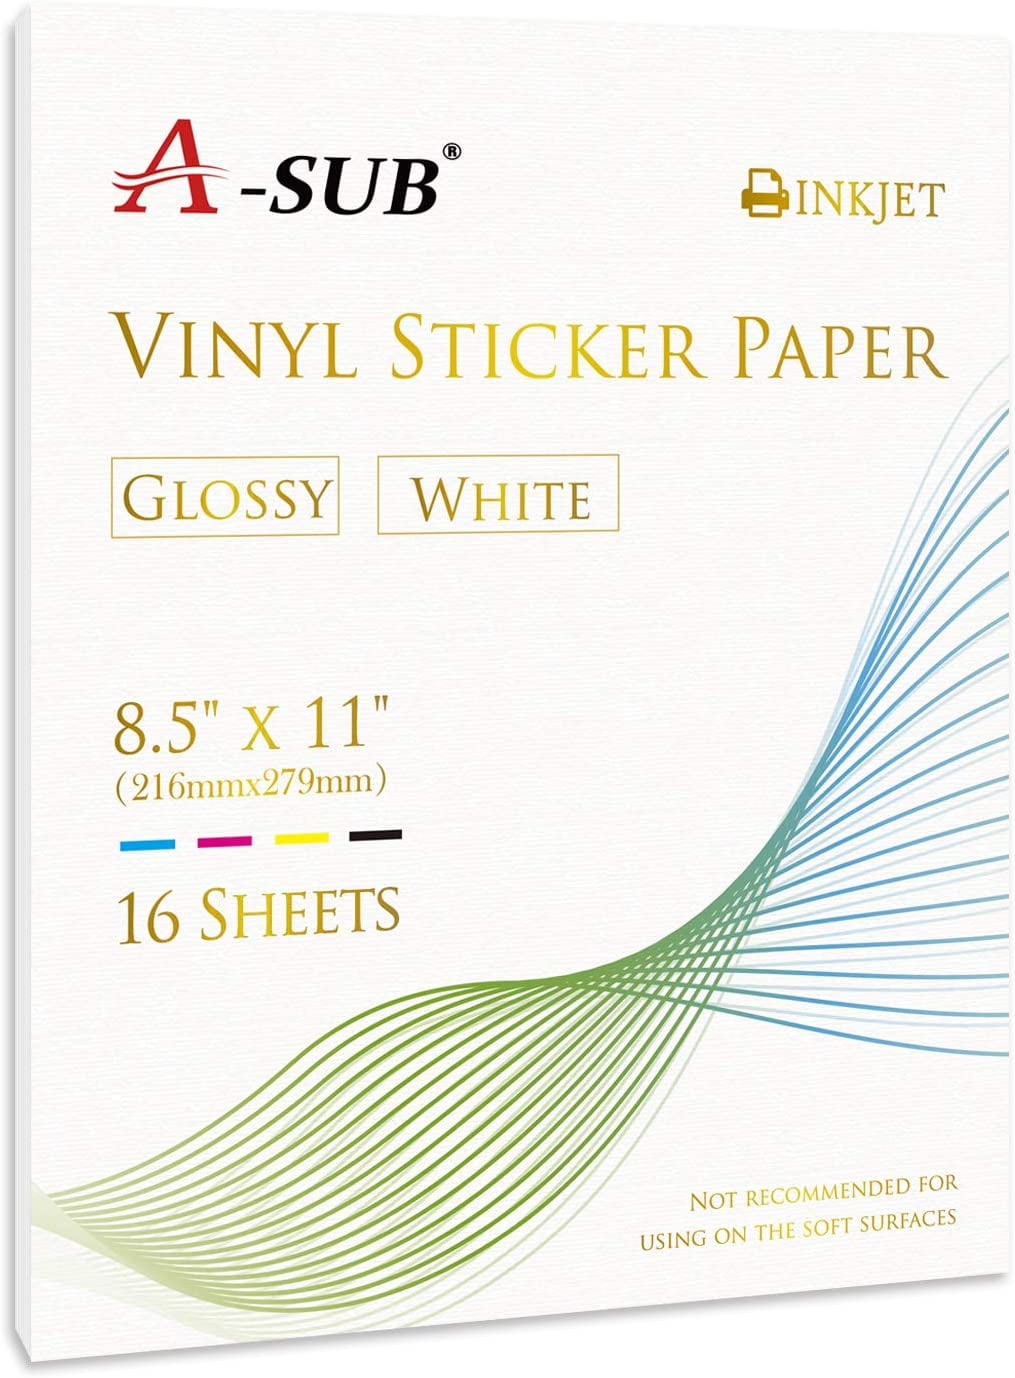 Waterproof Decal Paper for Inkjet Printer Glossy White 50 Self-Adhesive Sheets Printable Vinyl Sticker Paper Standard Letter Size 8.5x11